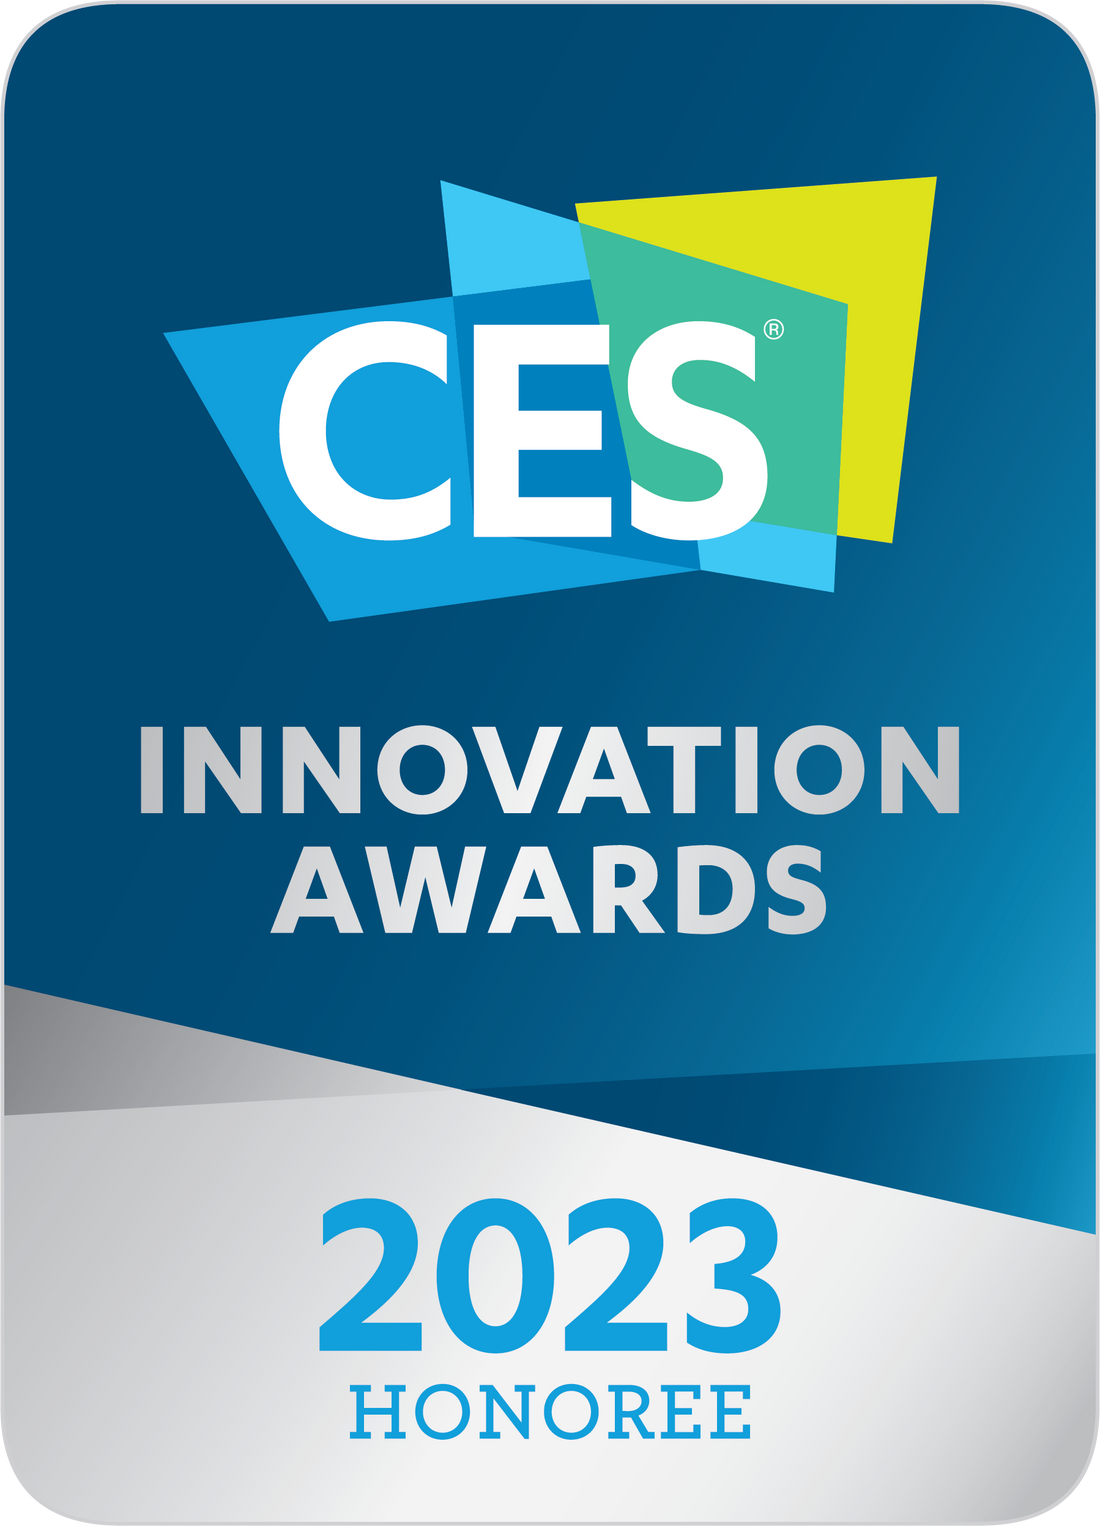 CES Innovation Awards 2023 Honoree